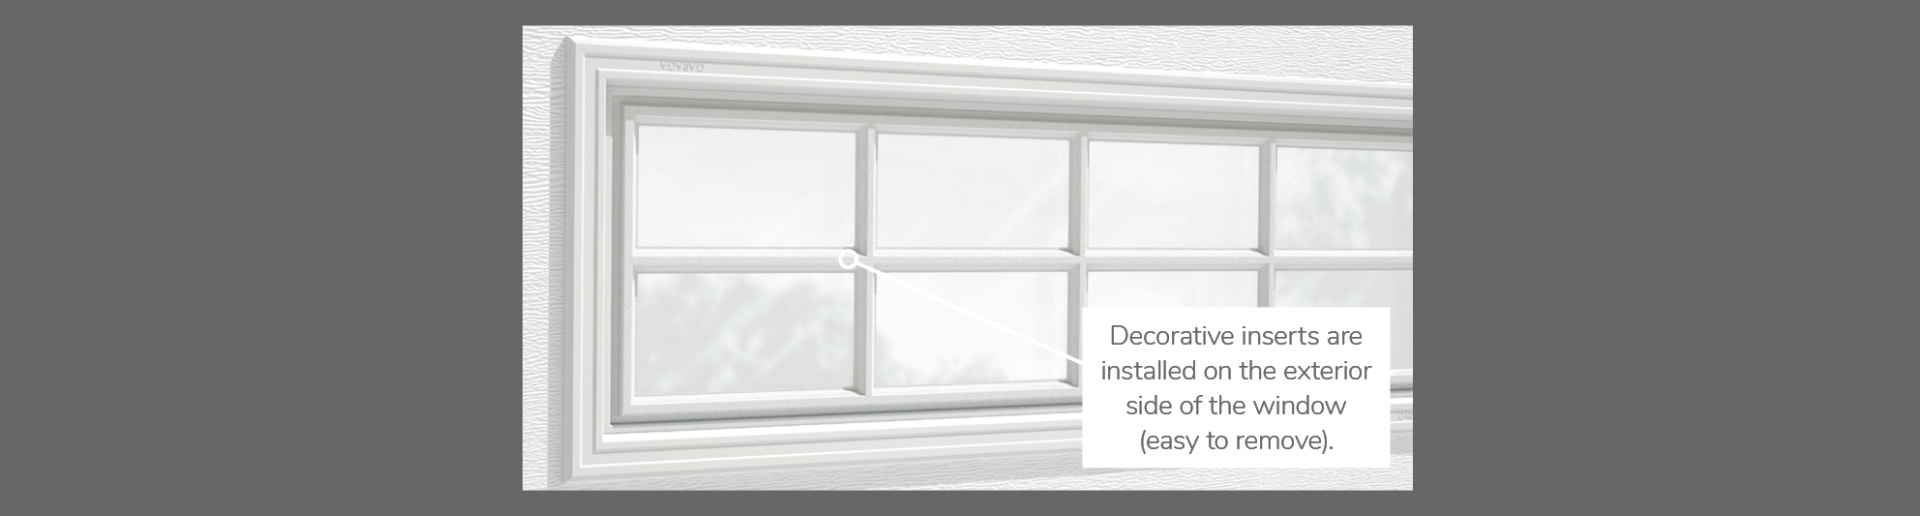 Stockton Decorative Insert, 40" x 13", 21" x 13", 41" x 16" or 20" x 13", available for door R-16 and 3 layers - Polystyrene